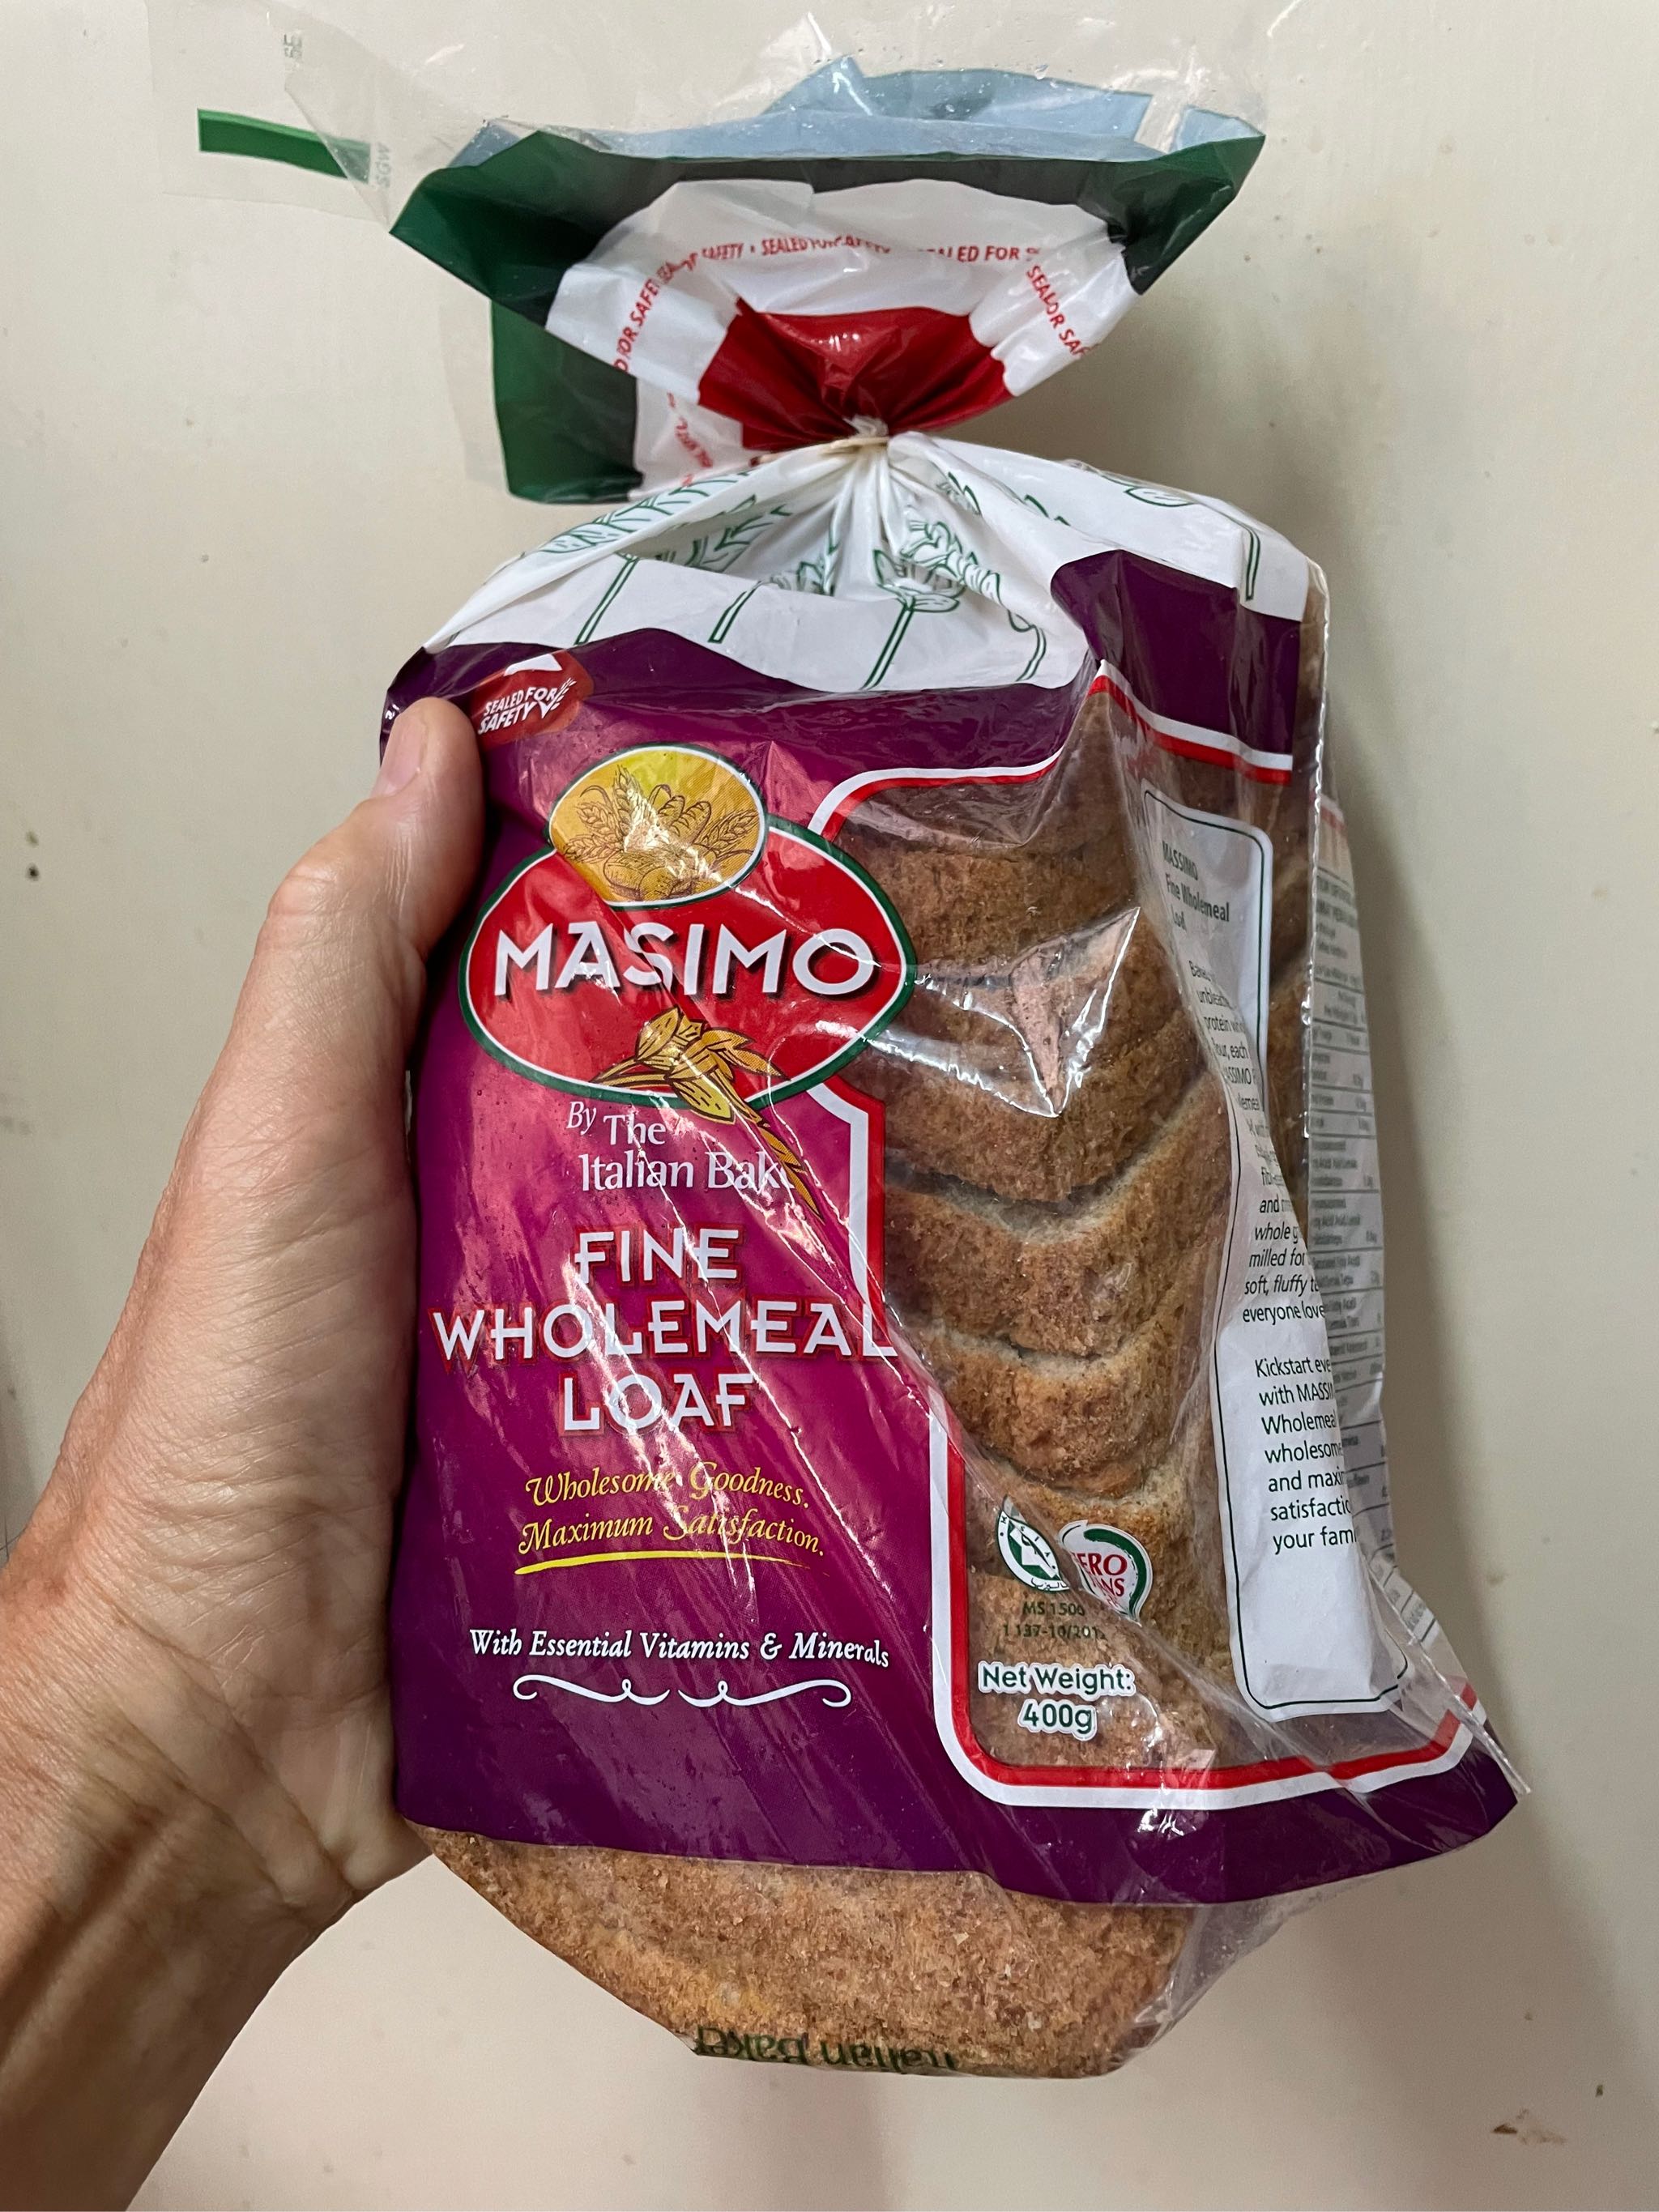 Wholemeal bread massimo Massimo’s limited